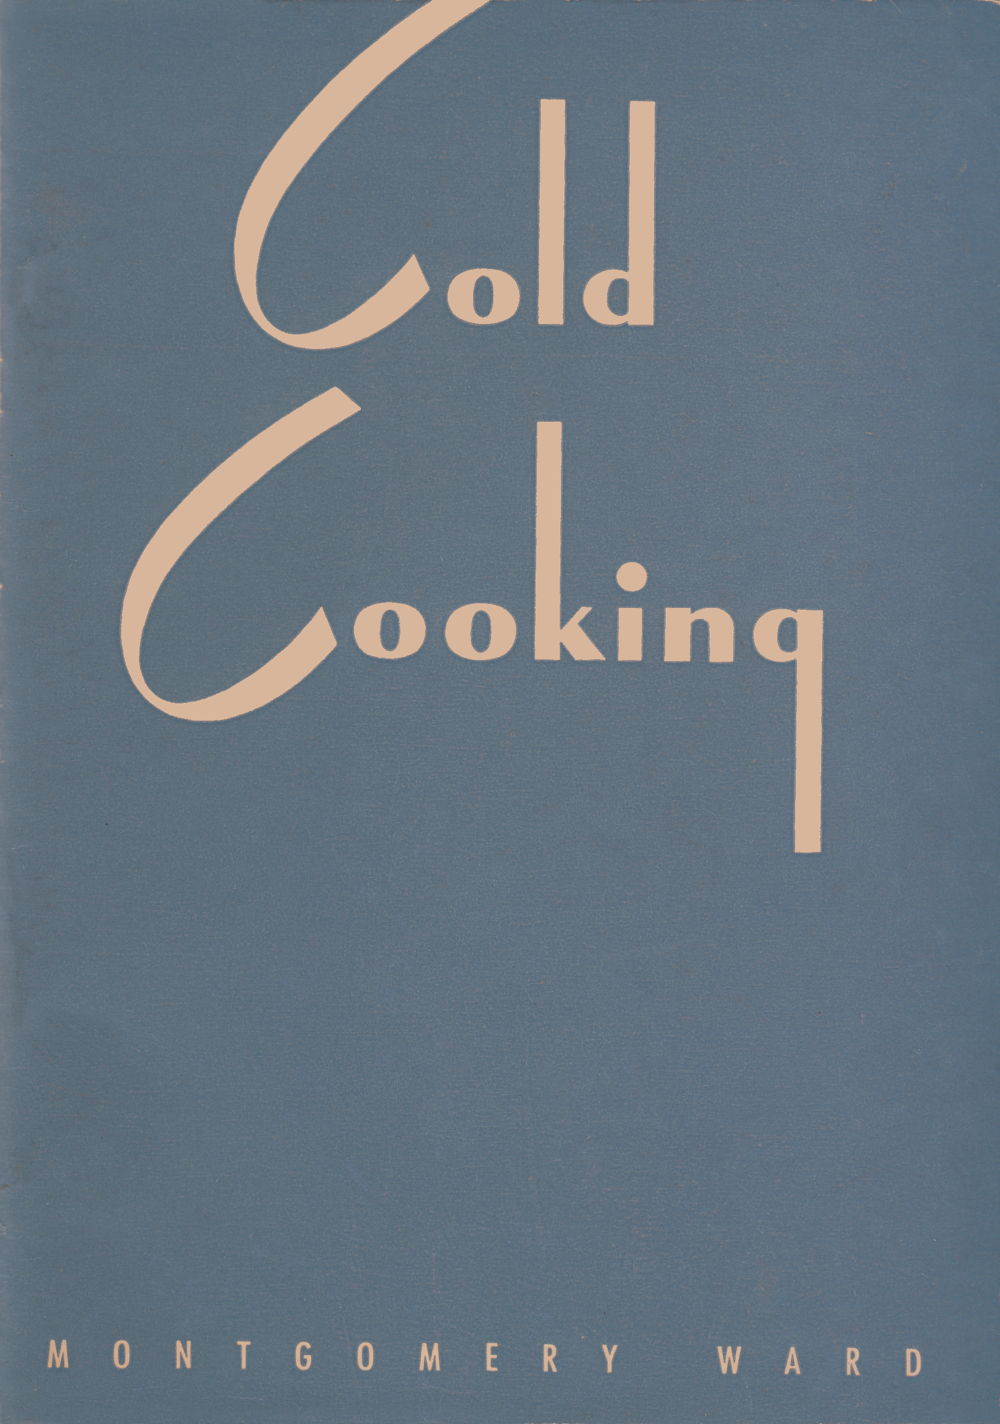 Montgomery Ward Cold Cooking